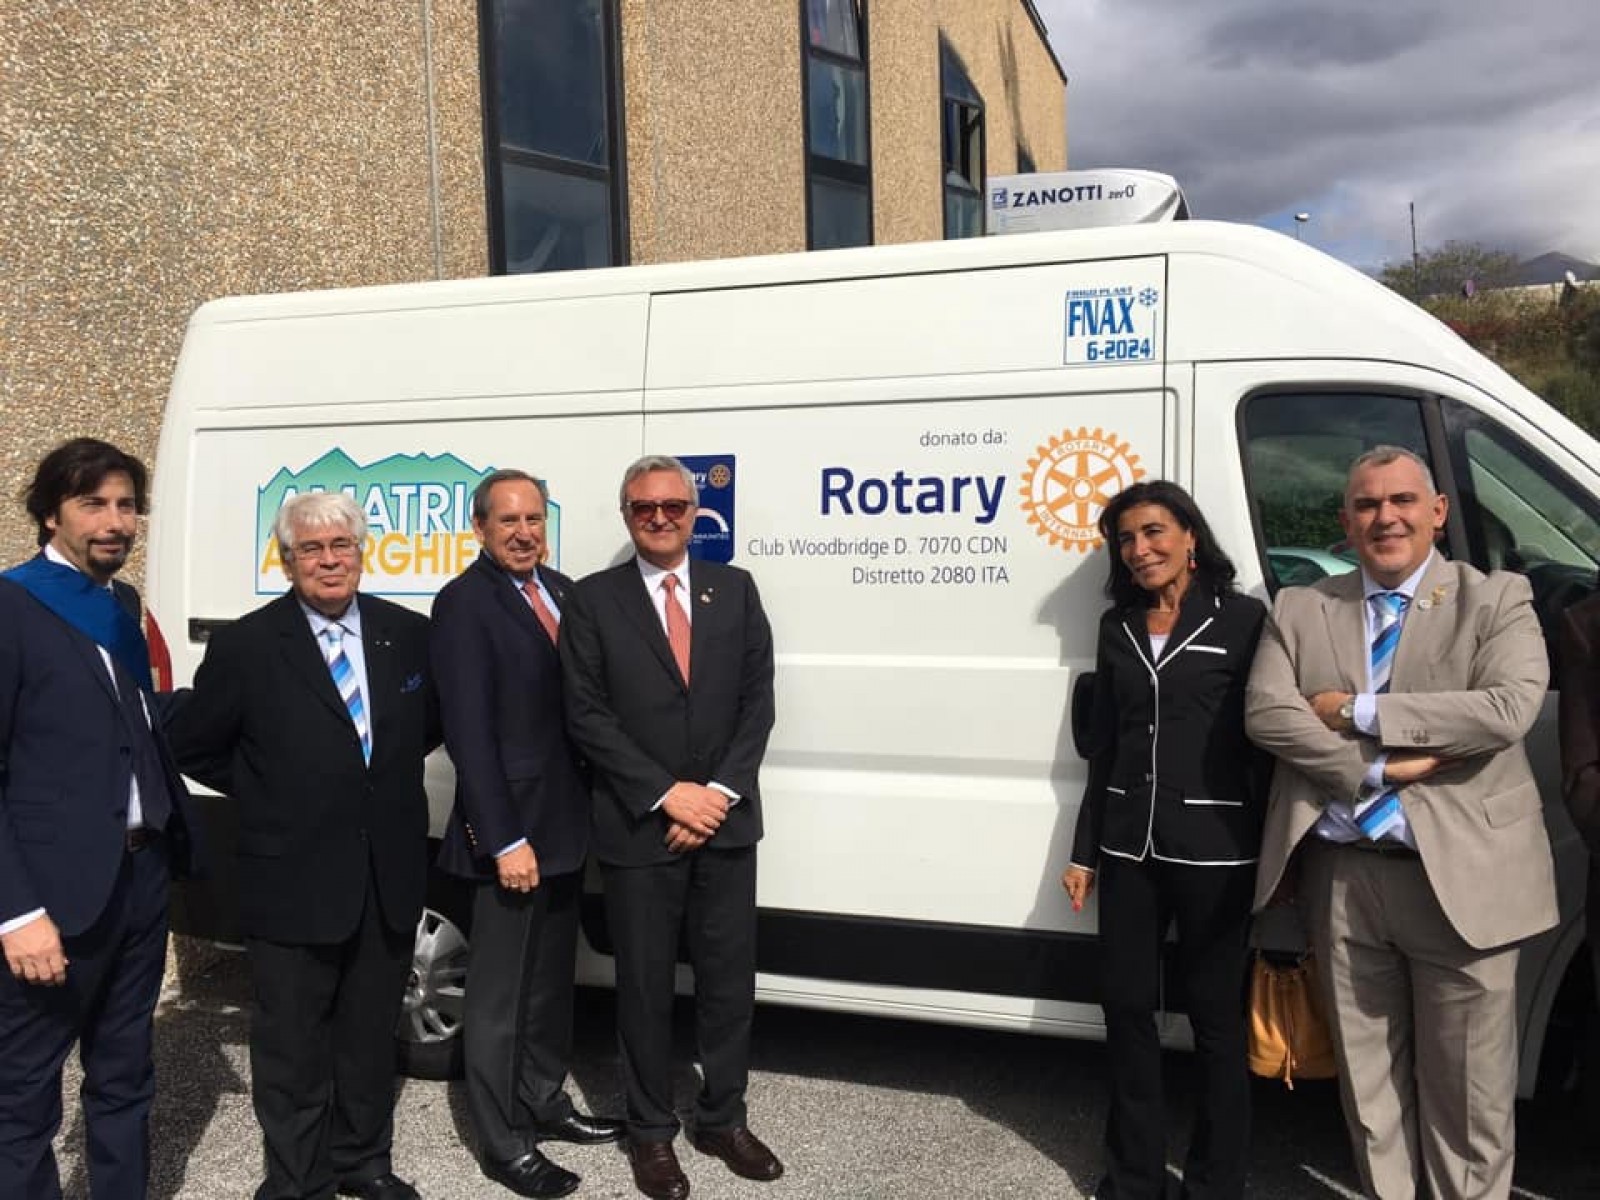 Gallery - Rotary for Amatrice